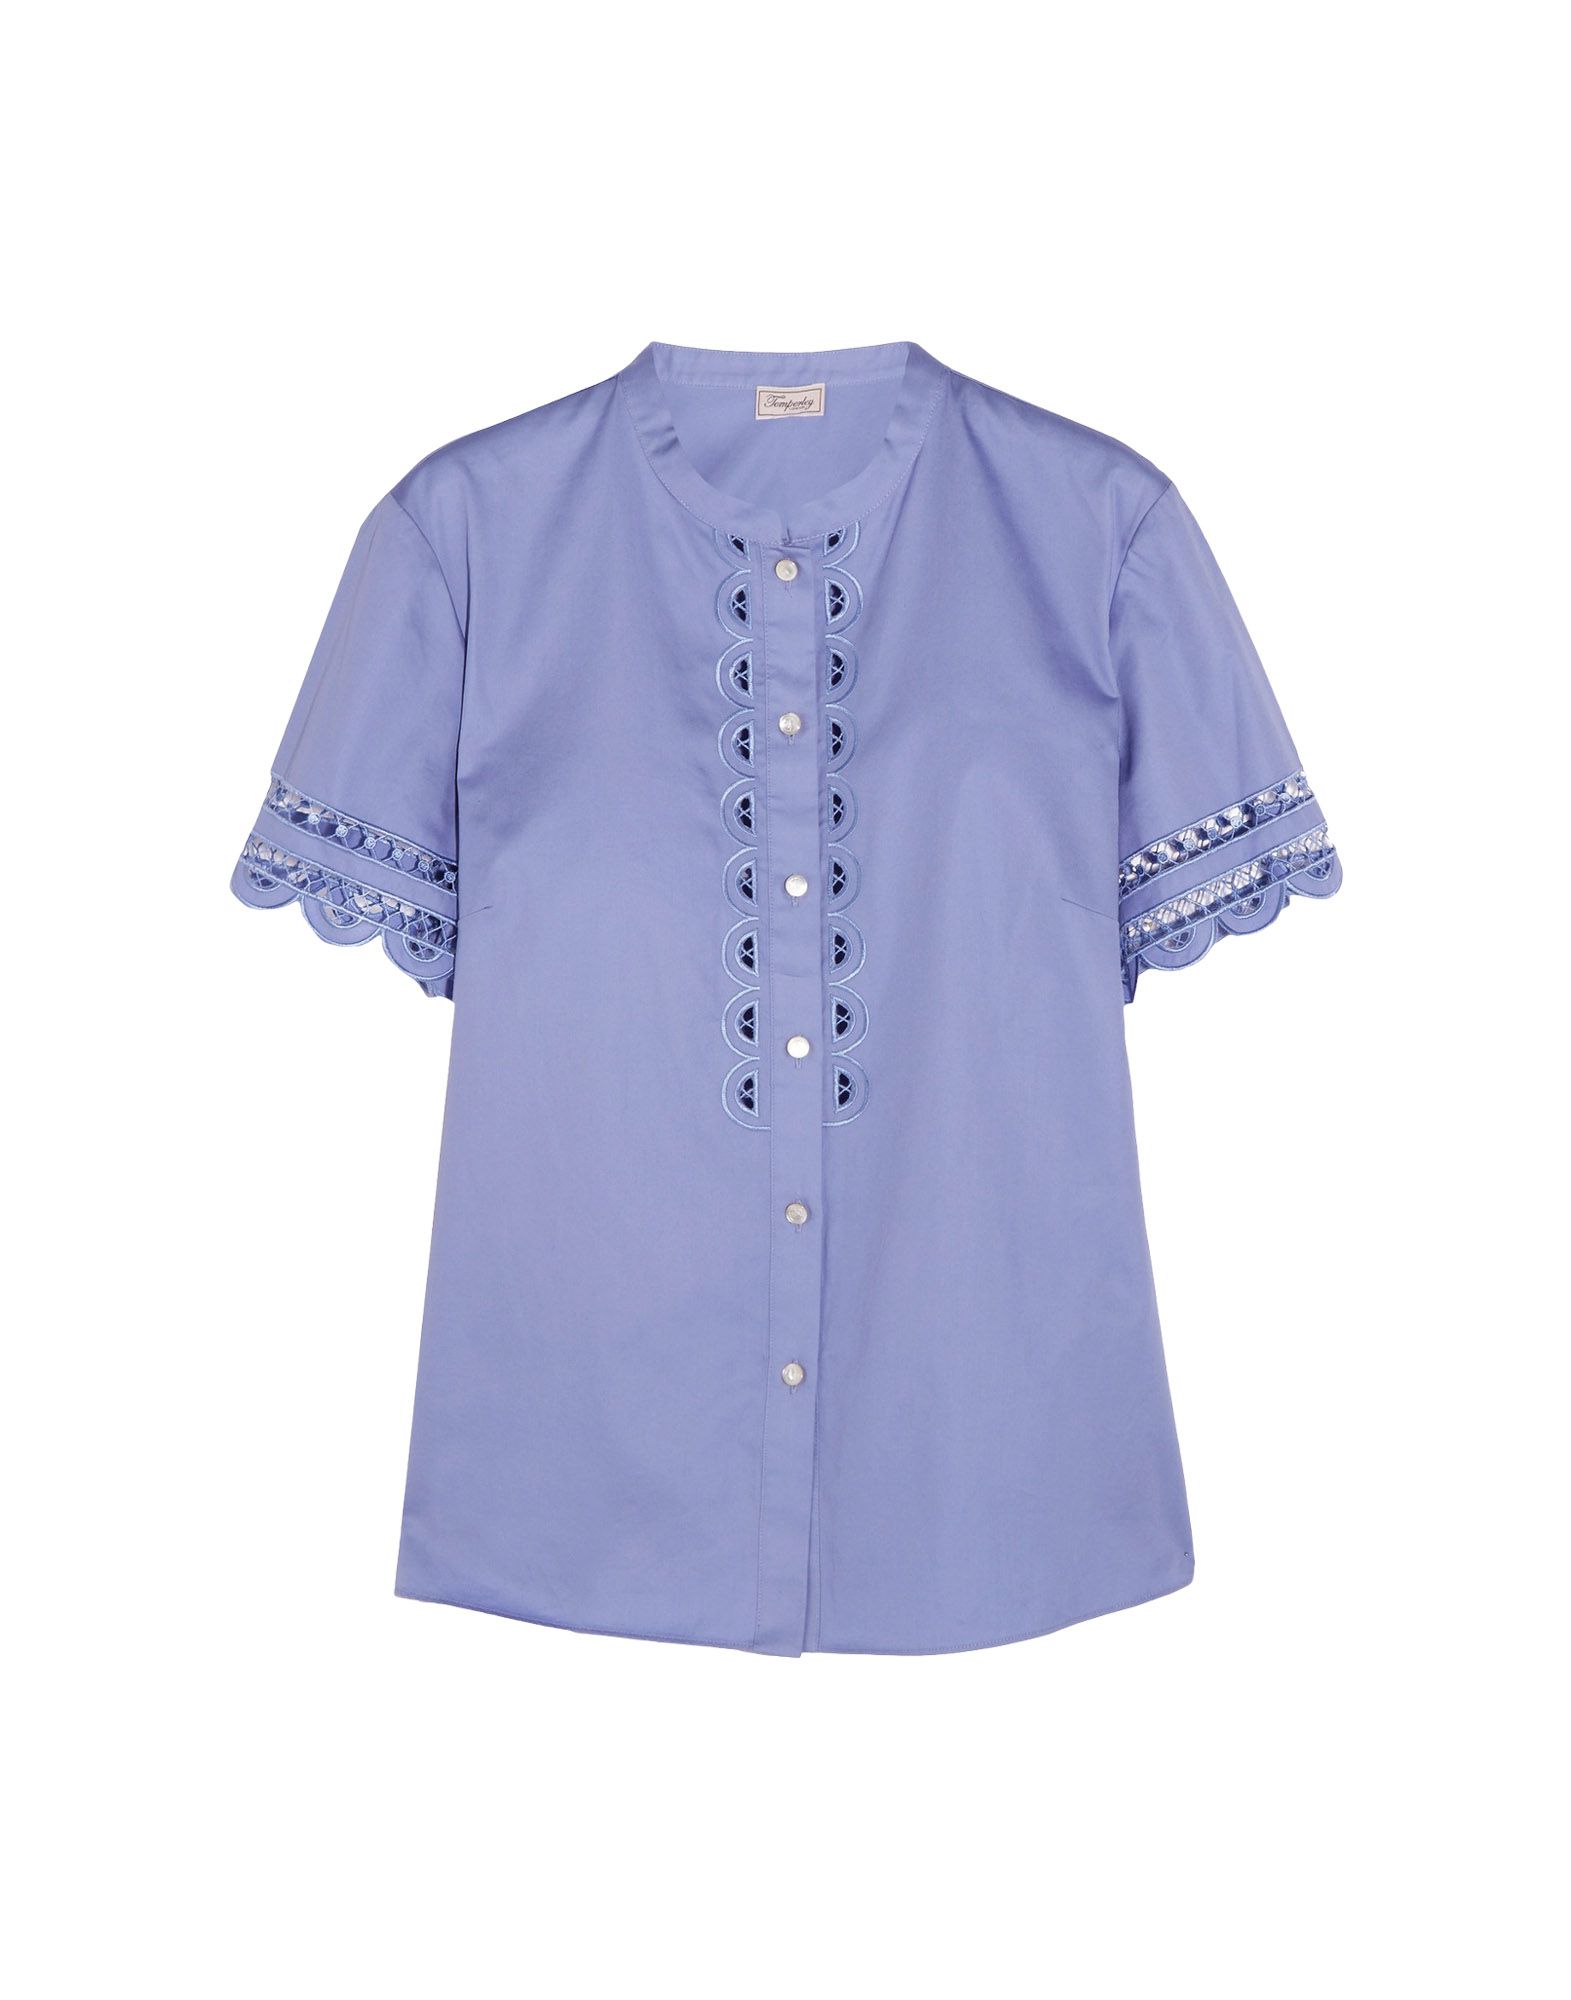 TEMPERLEY LONDON Solid color shirts & blouses,38761360DT 8